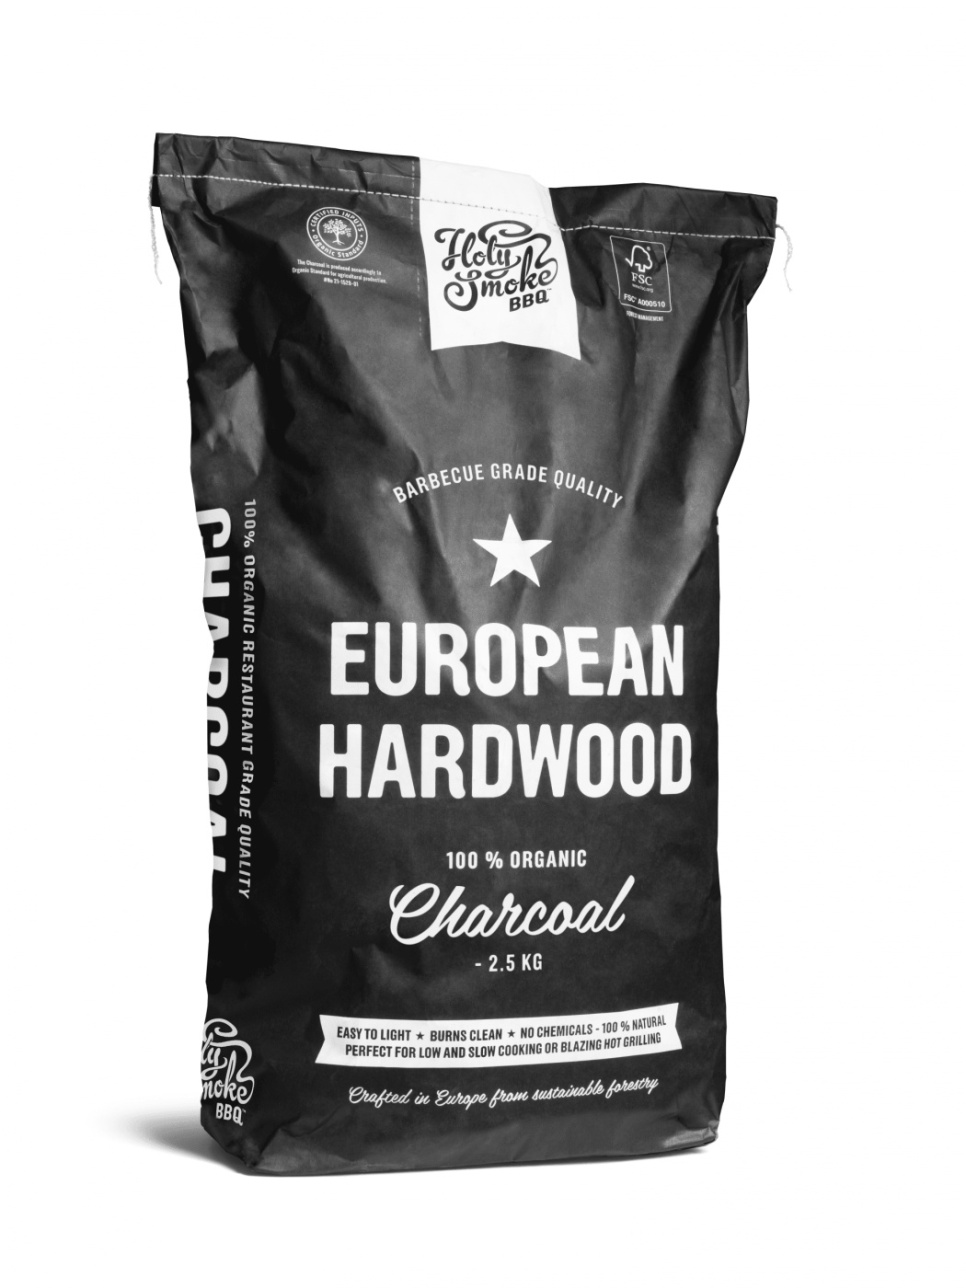 Barbecue charcoal, Lump Charcoal, 2,5 kg - Holy Smoke BBQ in the group Barbecues, Stoves & Ovens / Barbecue charcoal & briquettes / charcoal at KitchenLab (1282-26780)